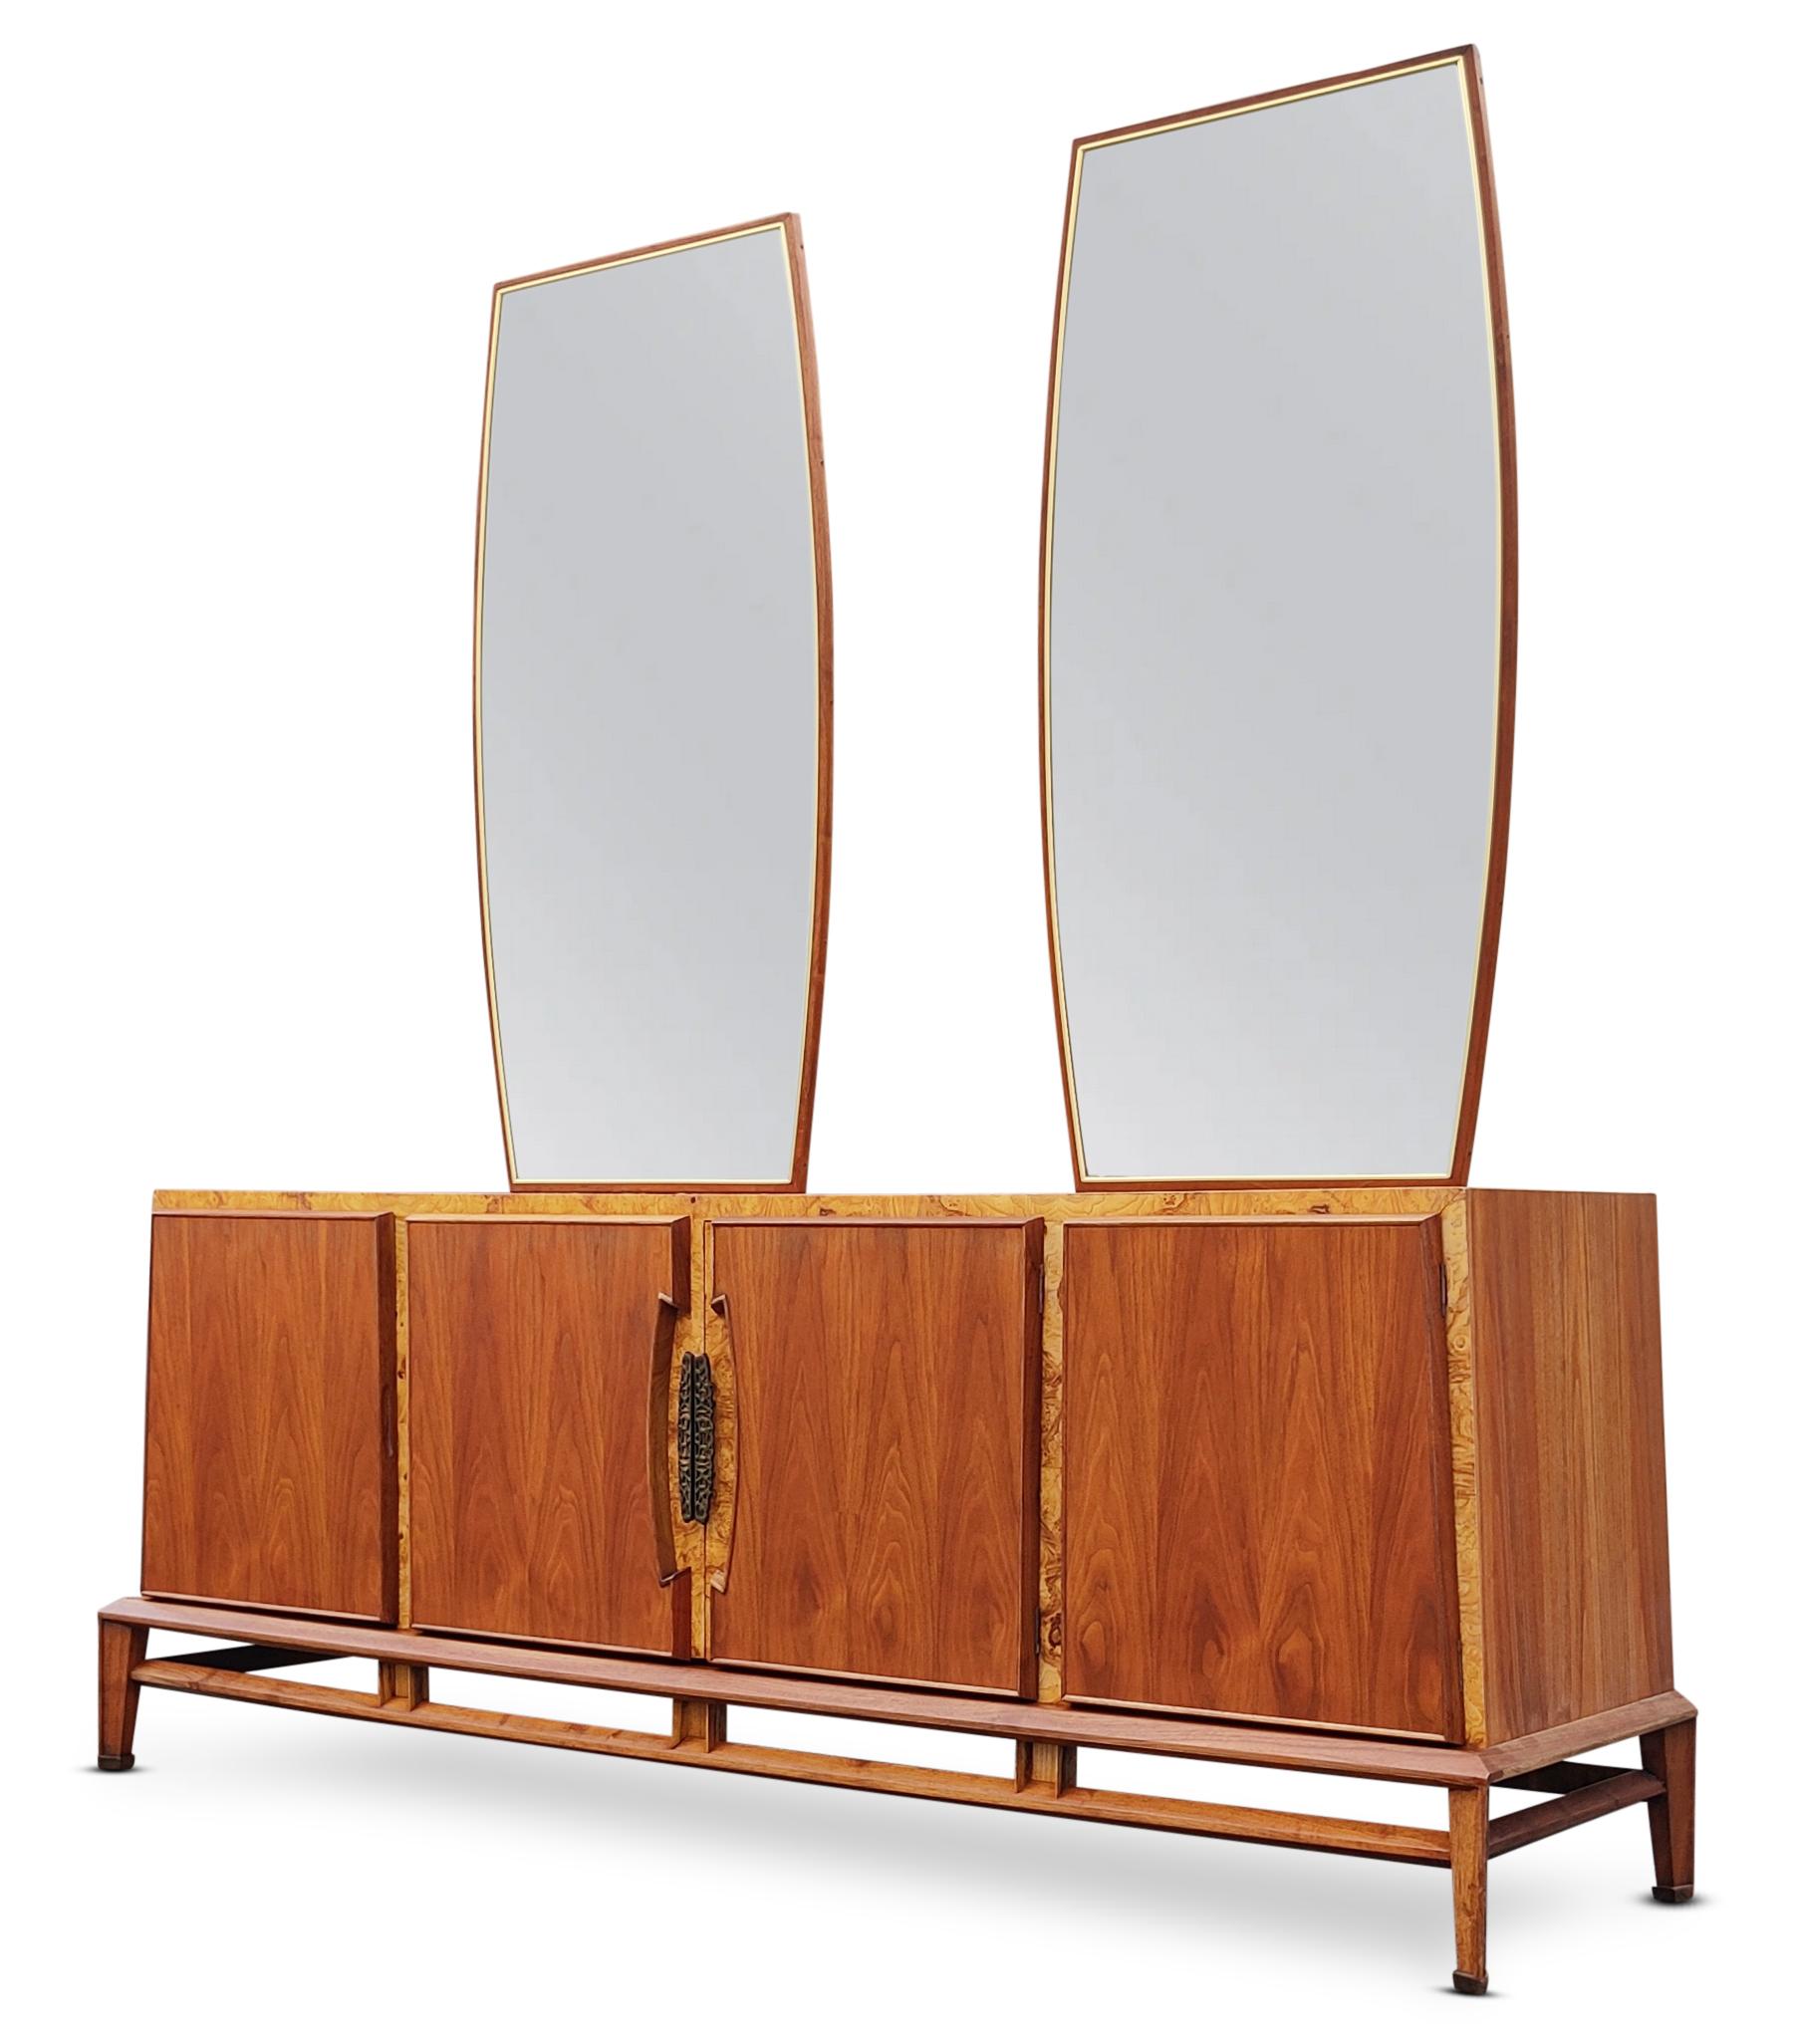 This rare and super sculptural cabinet or dresser was designed in the 1970s by Helen Hobey for Baker. It features a walnut and burlwood construction that is warm and pleasant to the eye. Sides that slope inward to meet the top, and an articulated